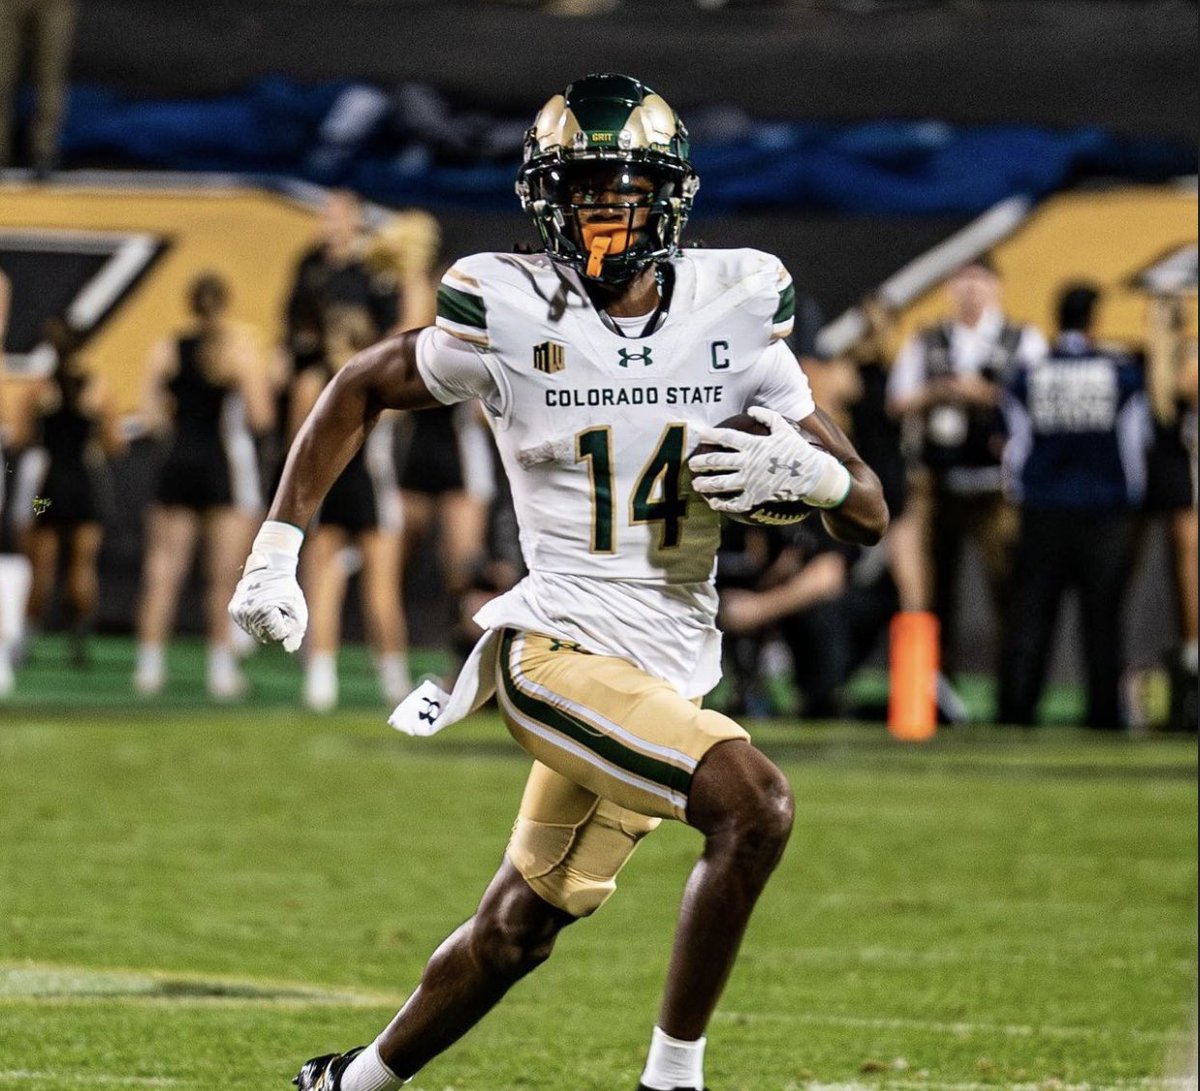 Colorado State WR Tory Horton is one of the best kept secrets in CFB🐏🙌

-2023 first-team All-MWC
-96 catches (FBS 5th)
-23.1 MPH top-speed (led FBS WRs)
-2,275 rec yds since 2022 (FBS 4th)

Horton is an outstanding WR talent who will continue to be a matchup nightmare in 2024⭐️